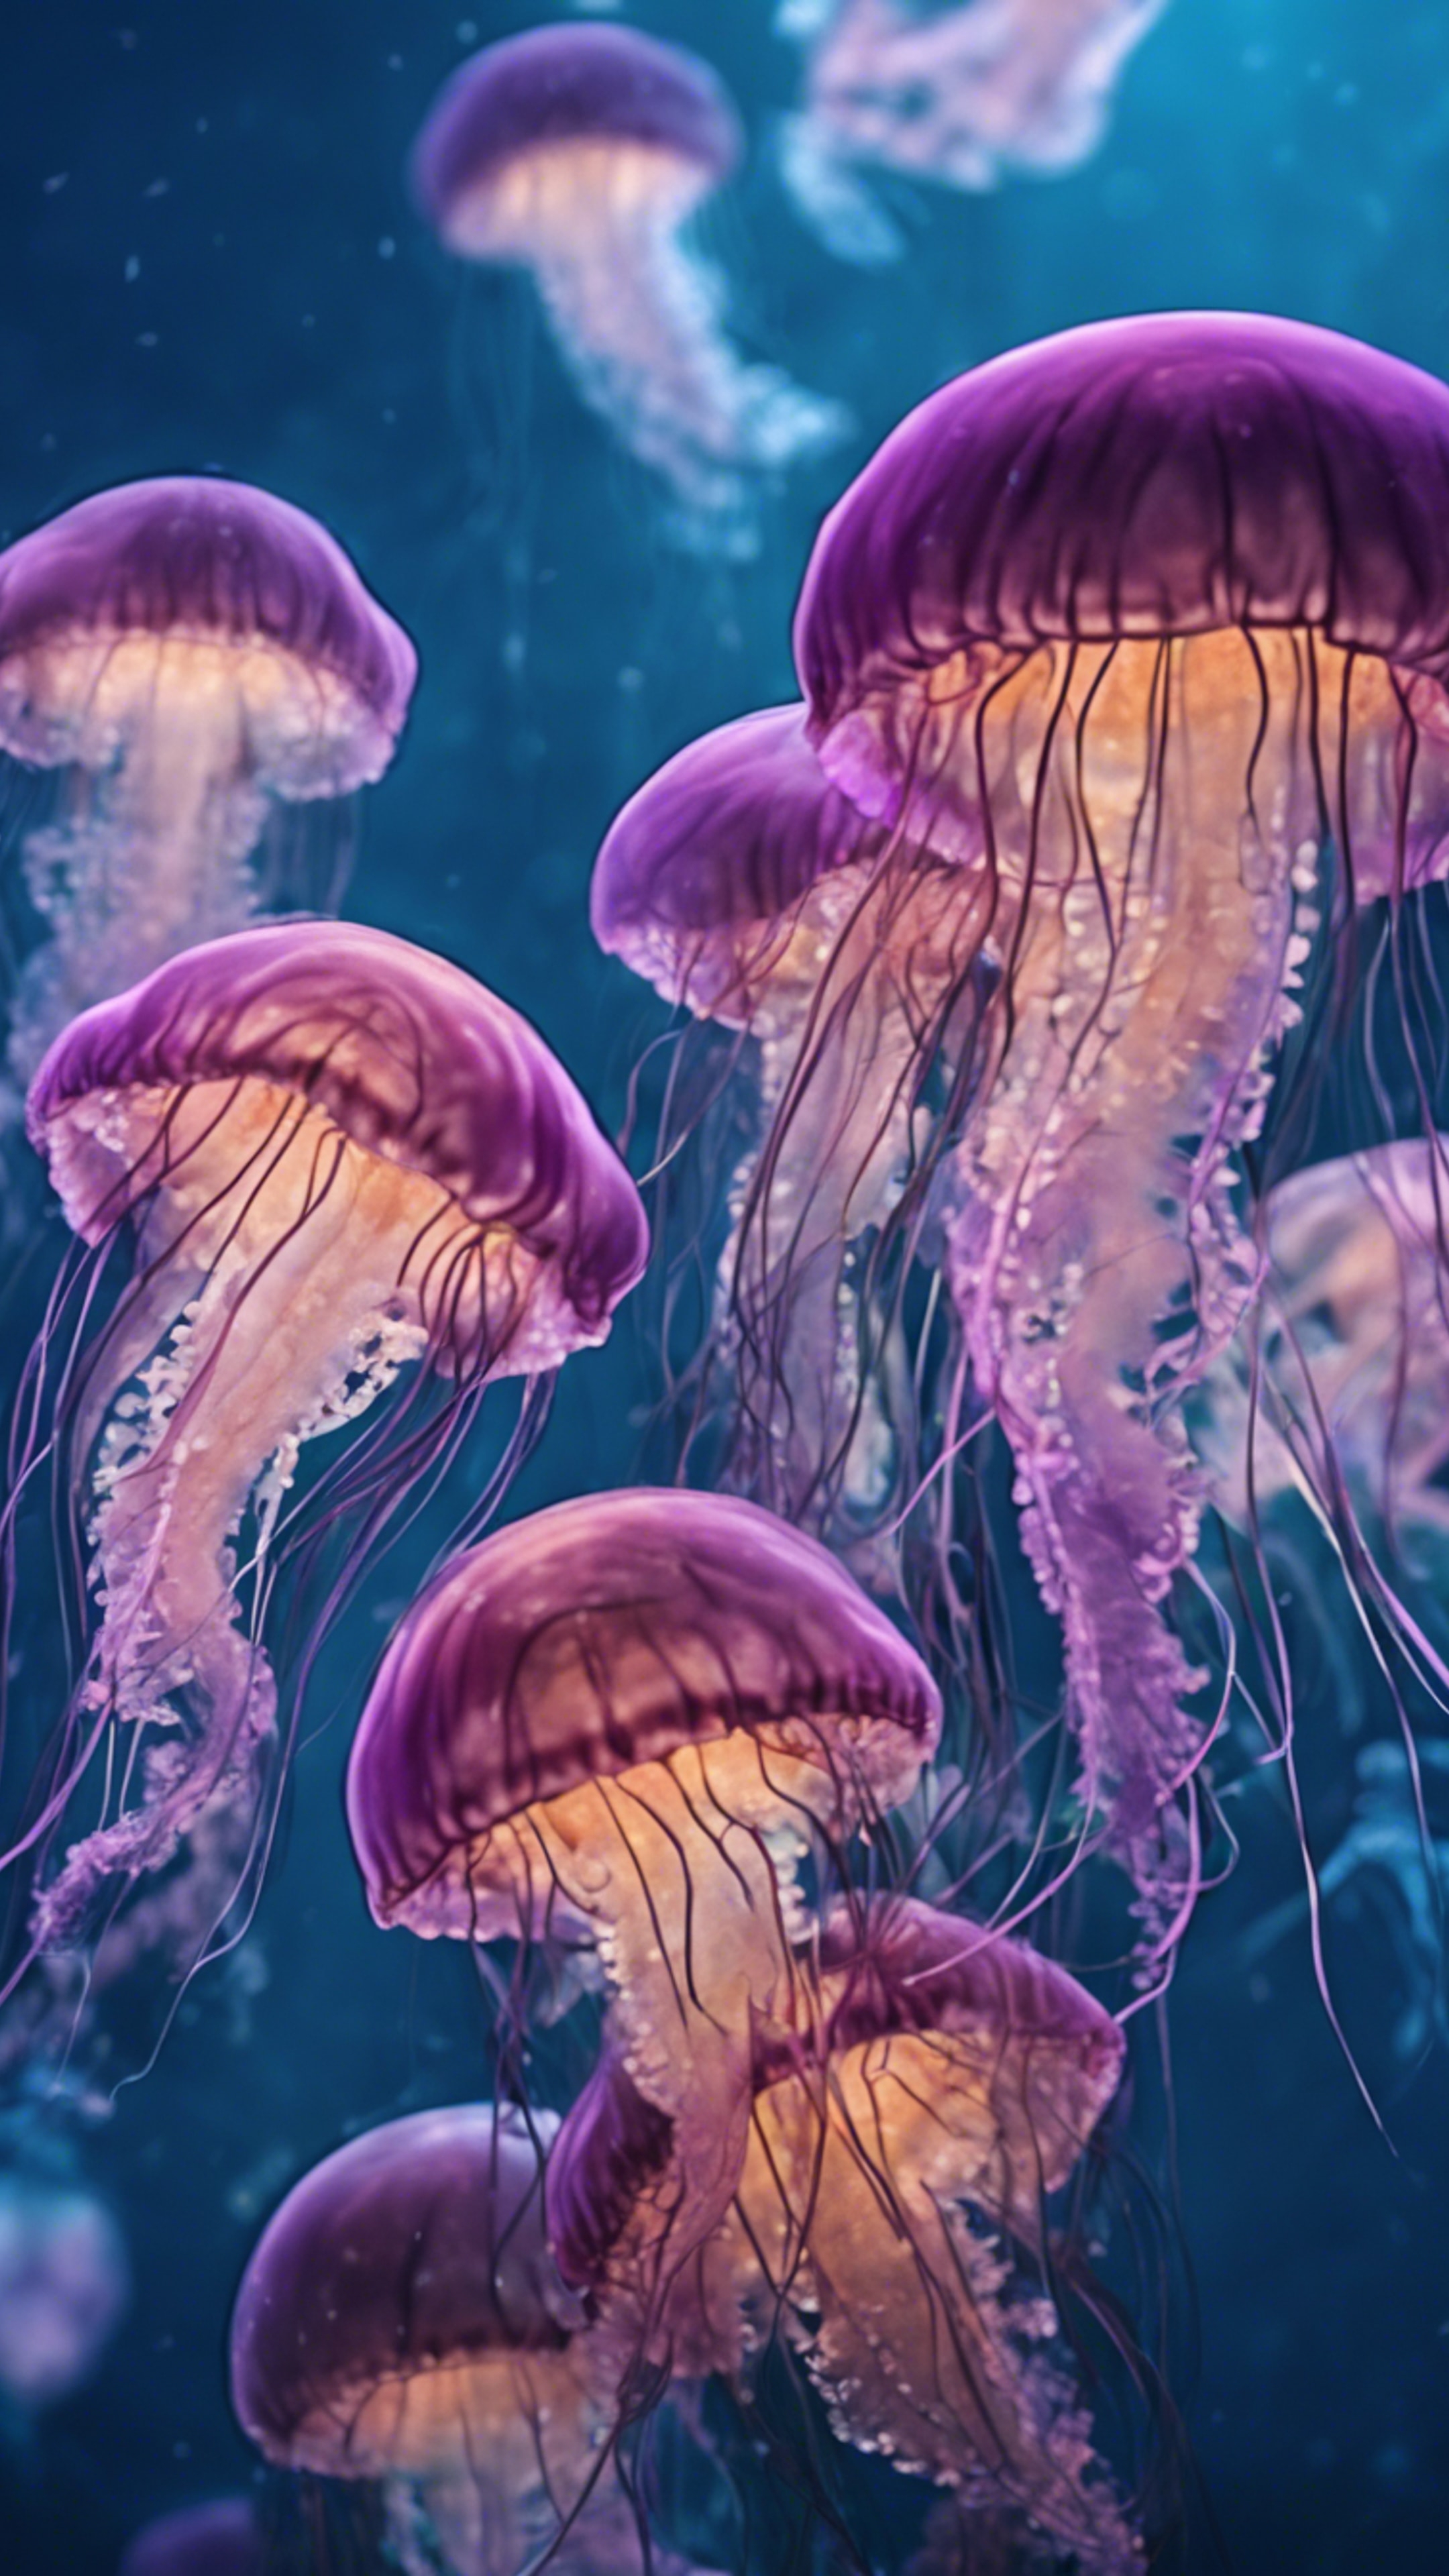 A detailed illustration of a group of ethereal jellyfish glowing in hues of blues and purples in the deep ocean.壁紙[9d08a2d997244e79aa03]